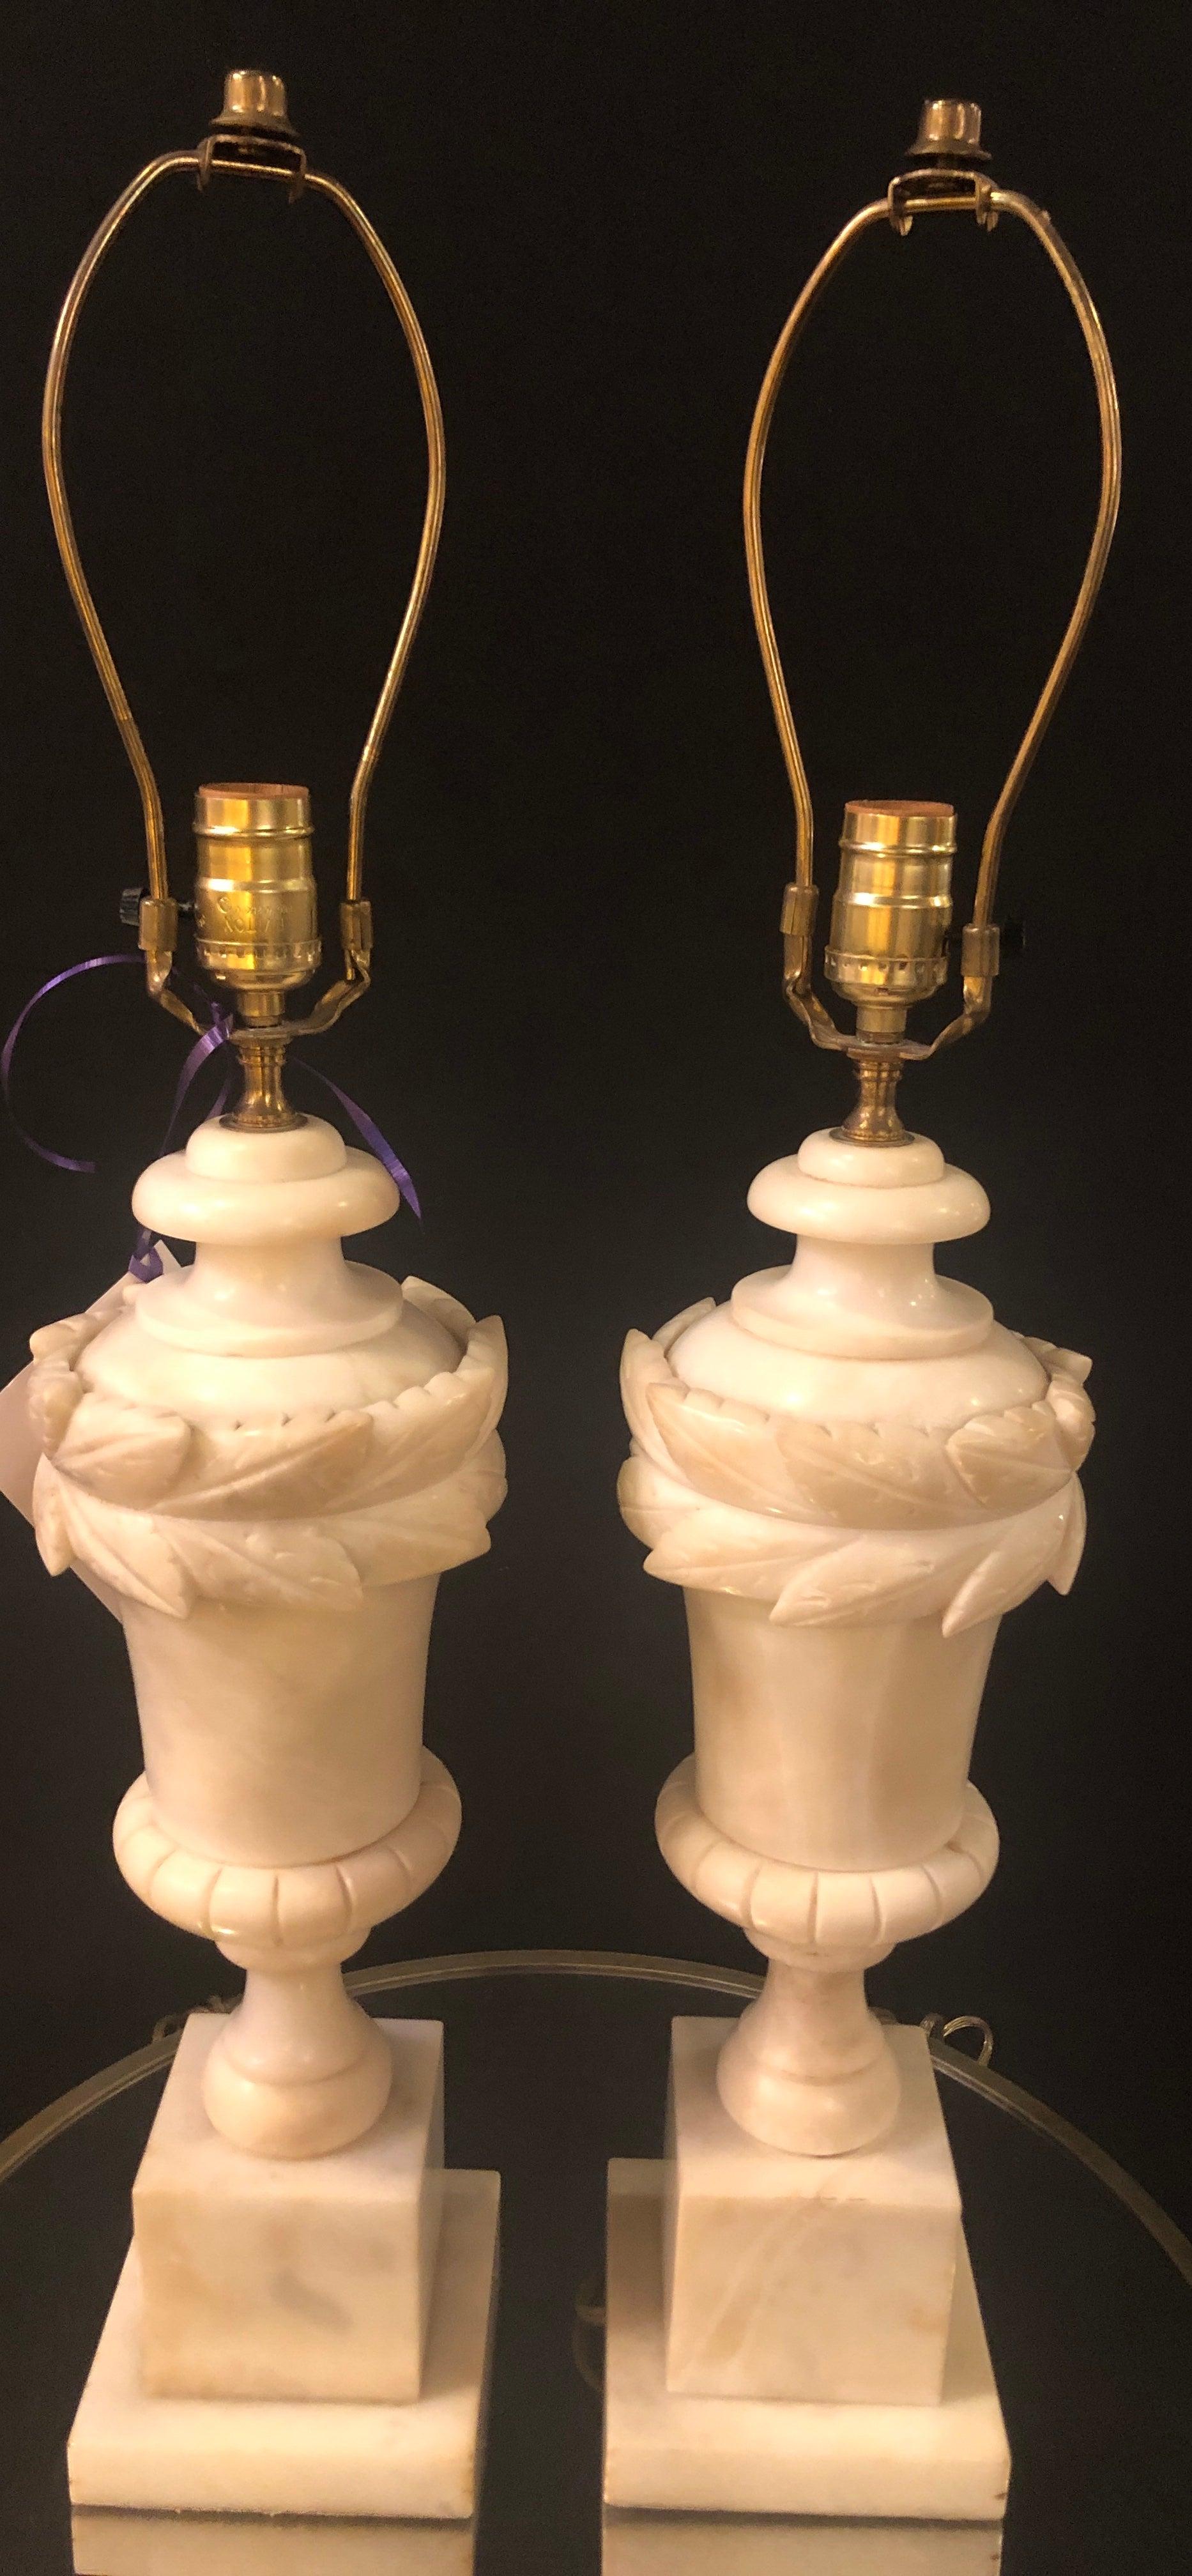 European Pair of French Neoclassical Style Off-White Alabaster Urn Shaped Table Lamps